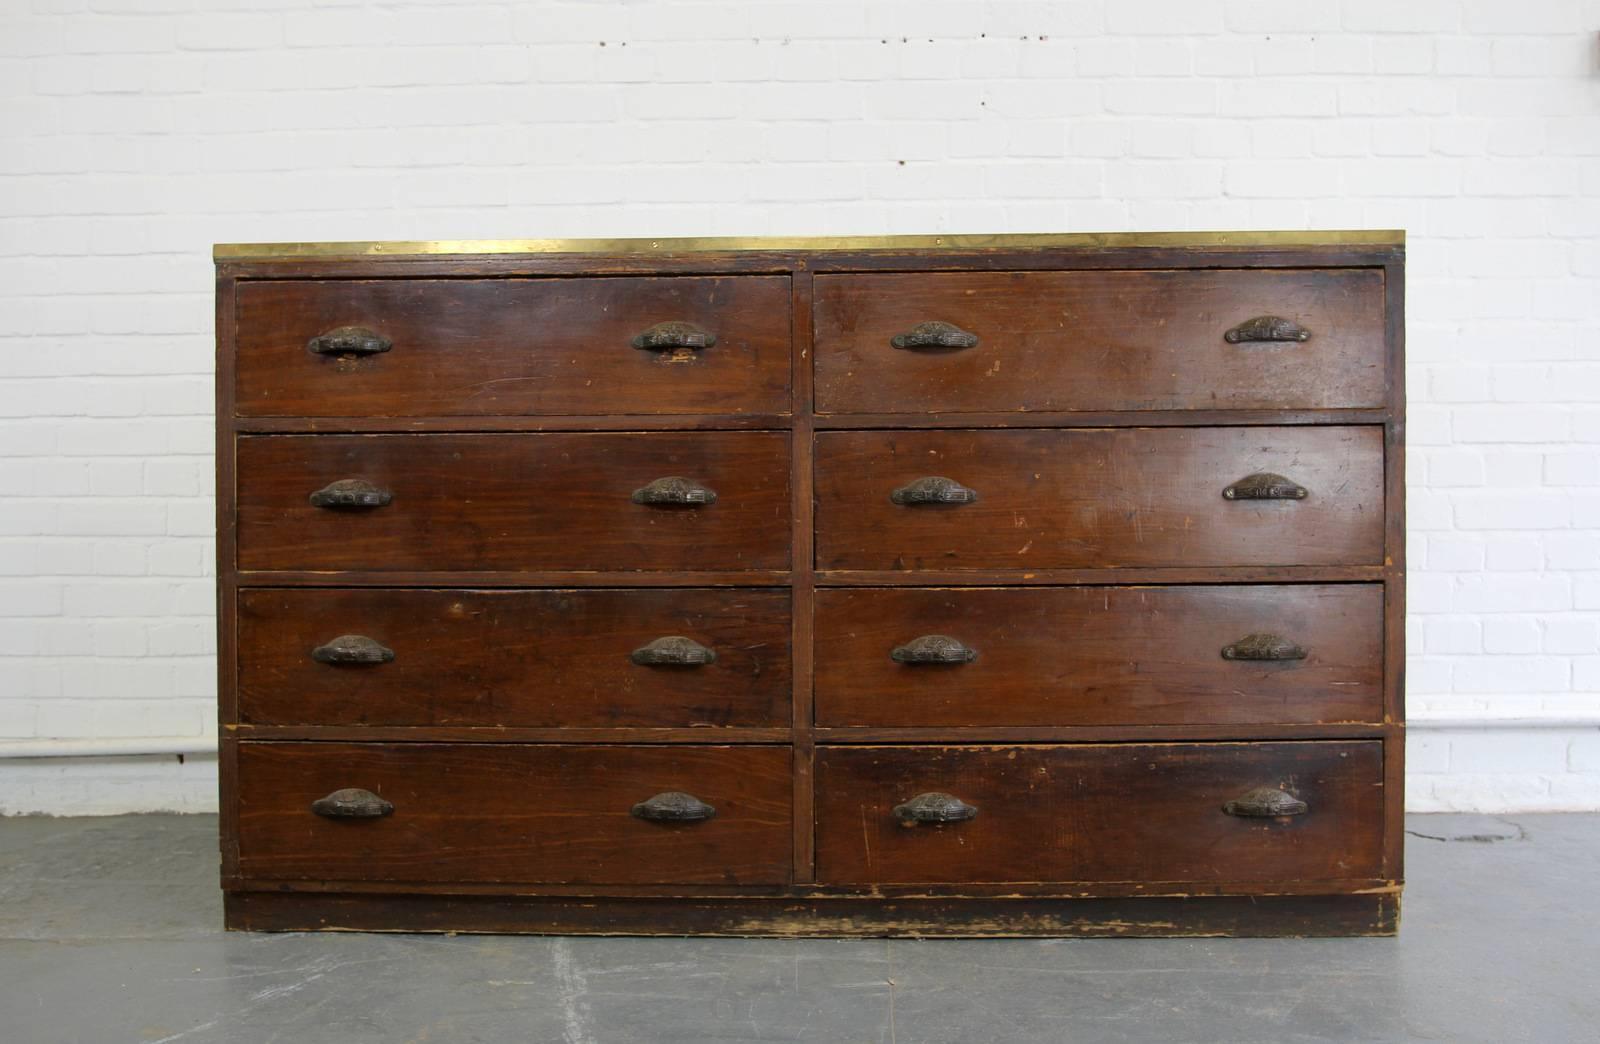 - Price is per unit (two available)
- Each unit consists of eight large drawers
- Solid pine
- Beautiful ornate cast iron handles with belt buckle detail
- Brass edging
- Salvaged from a tailors in central Amsterdam
- Dutch, circa 1900
- Each